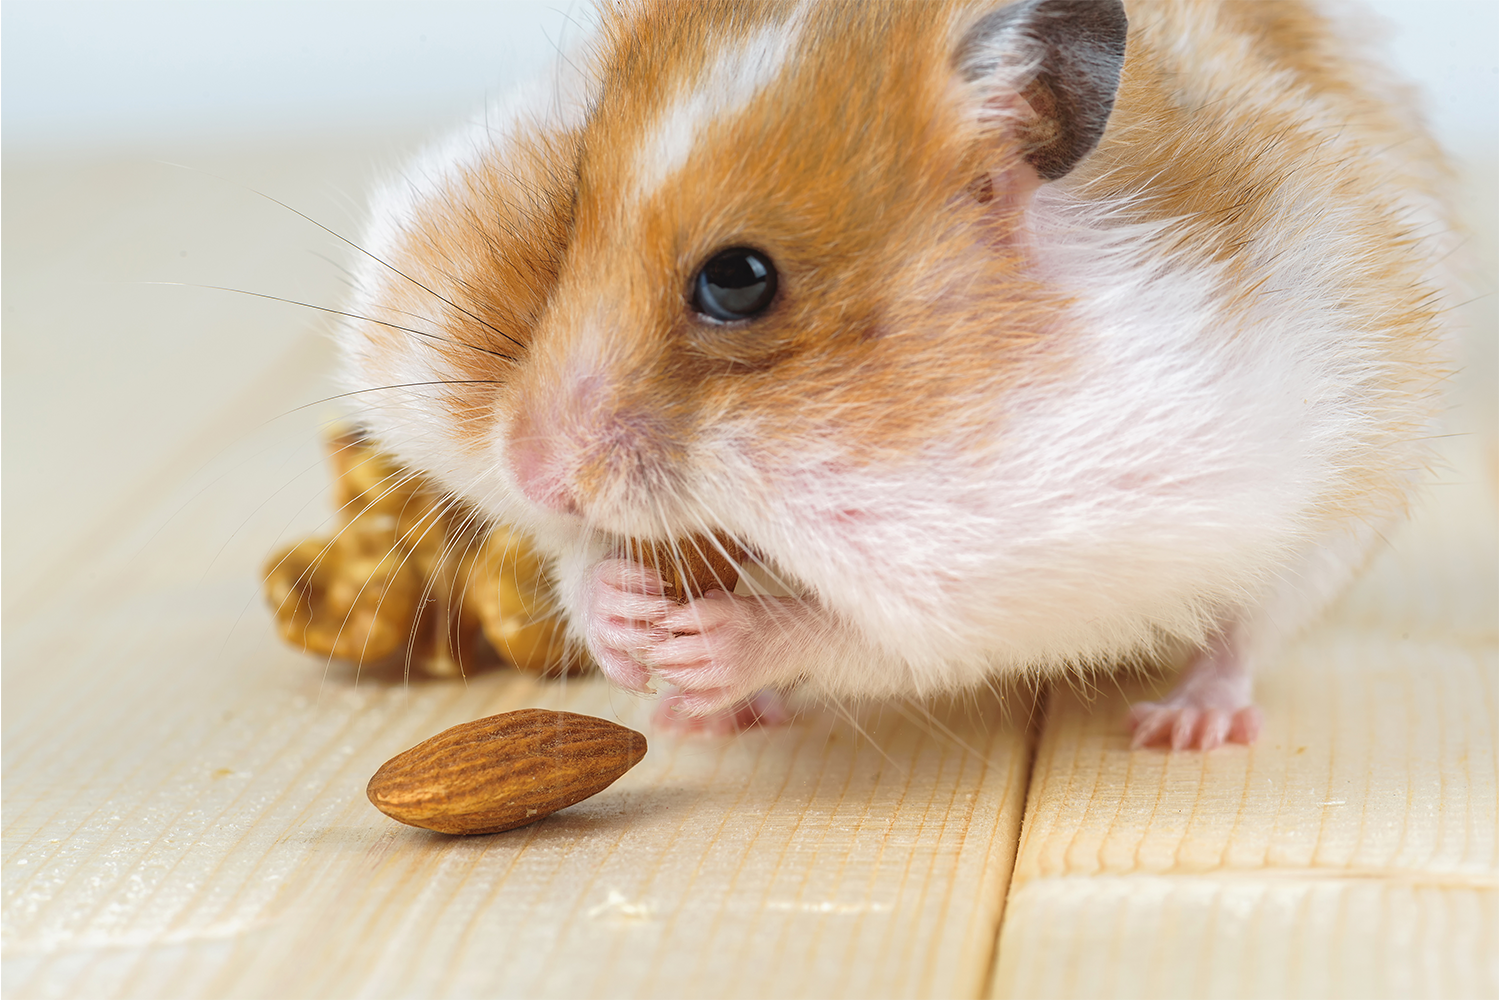 A Hamster’s Diet